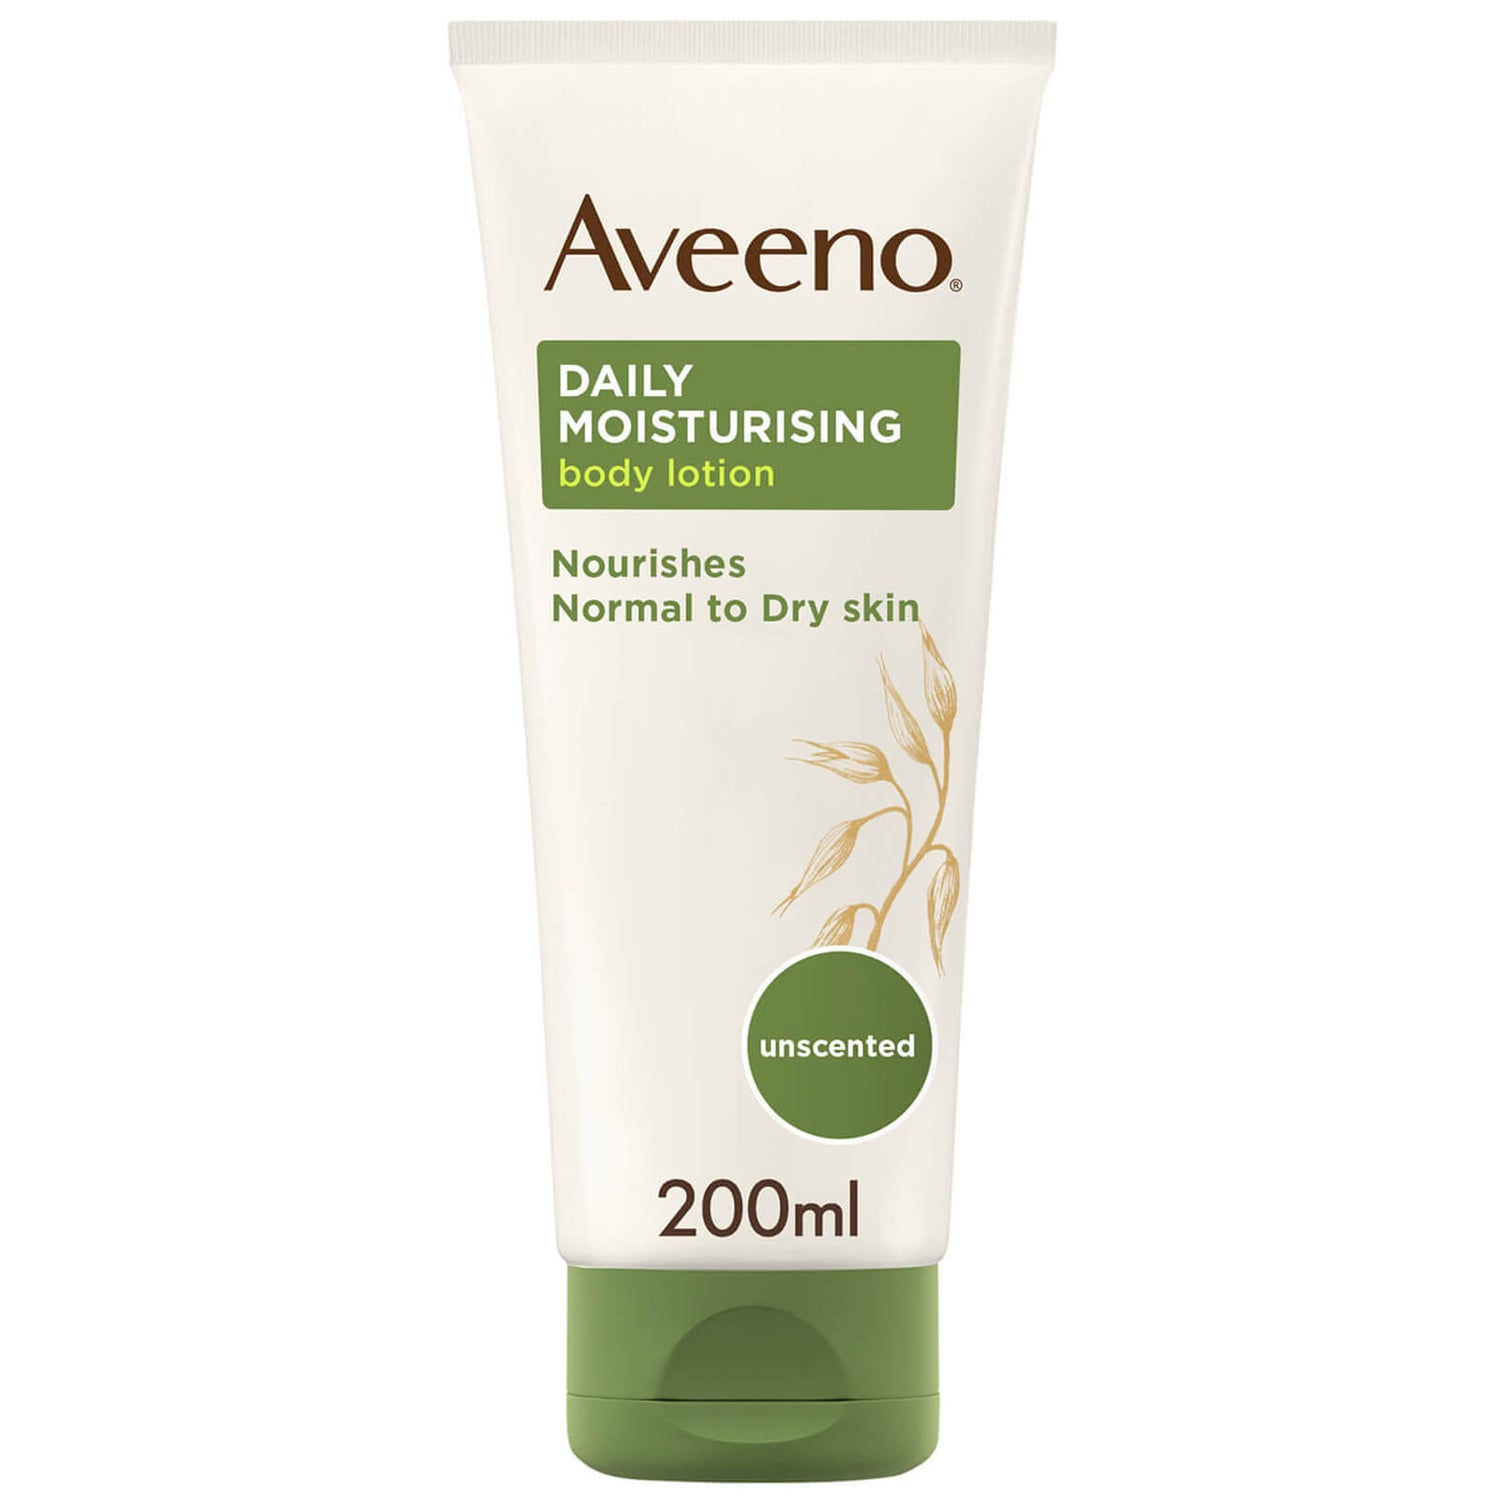 Aveeno Daily Moisturising Lotion 200ml - FREE Delivery